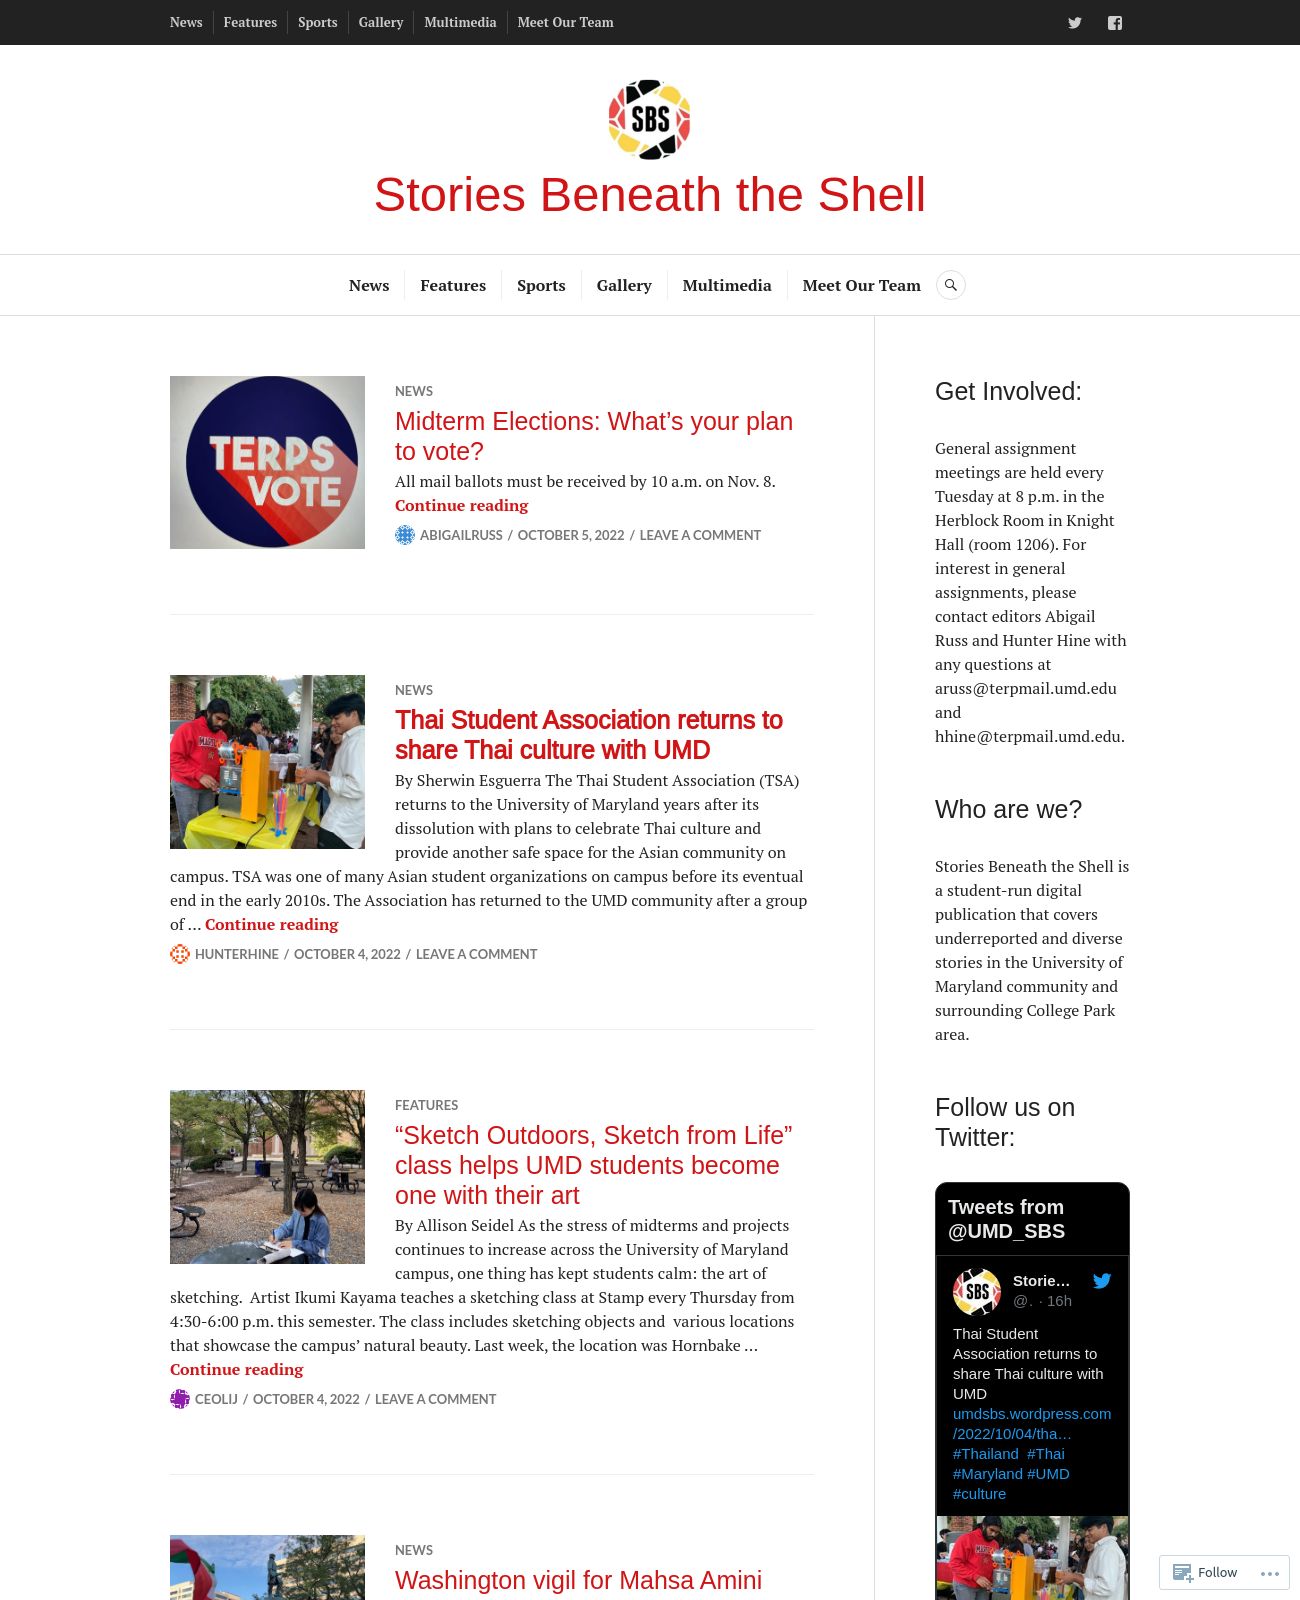 Stories Beneath the Shell at 2022-10-05 11:34:46-04:00 local time